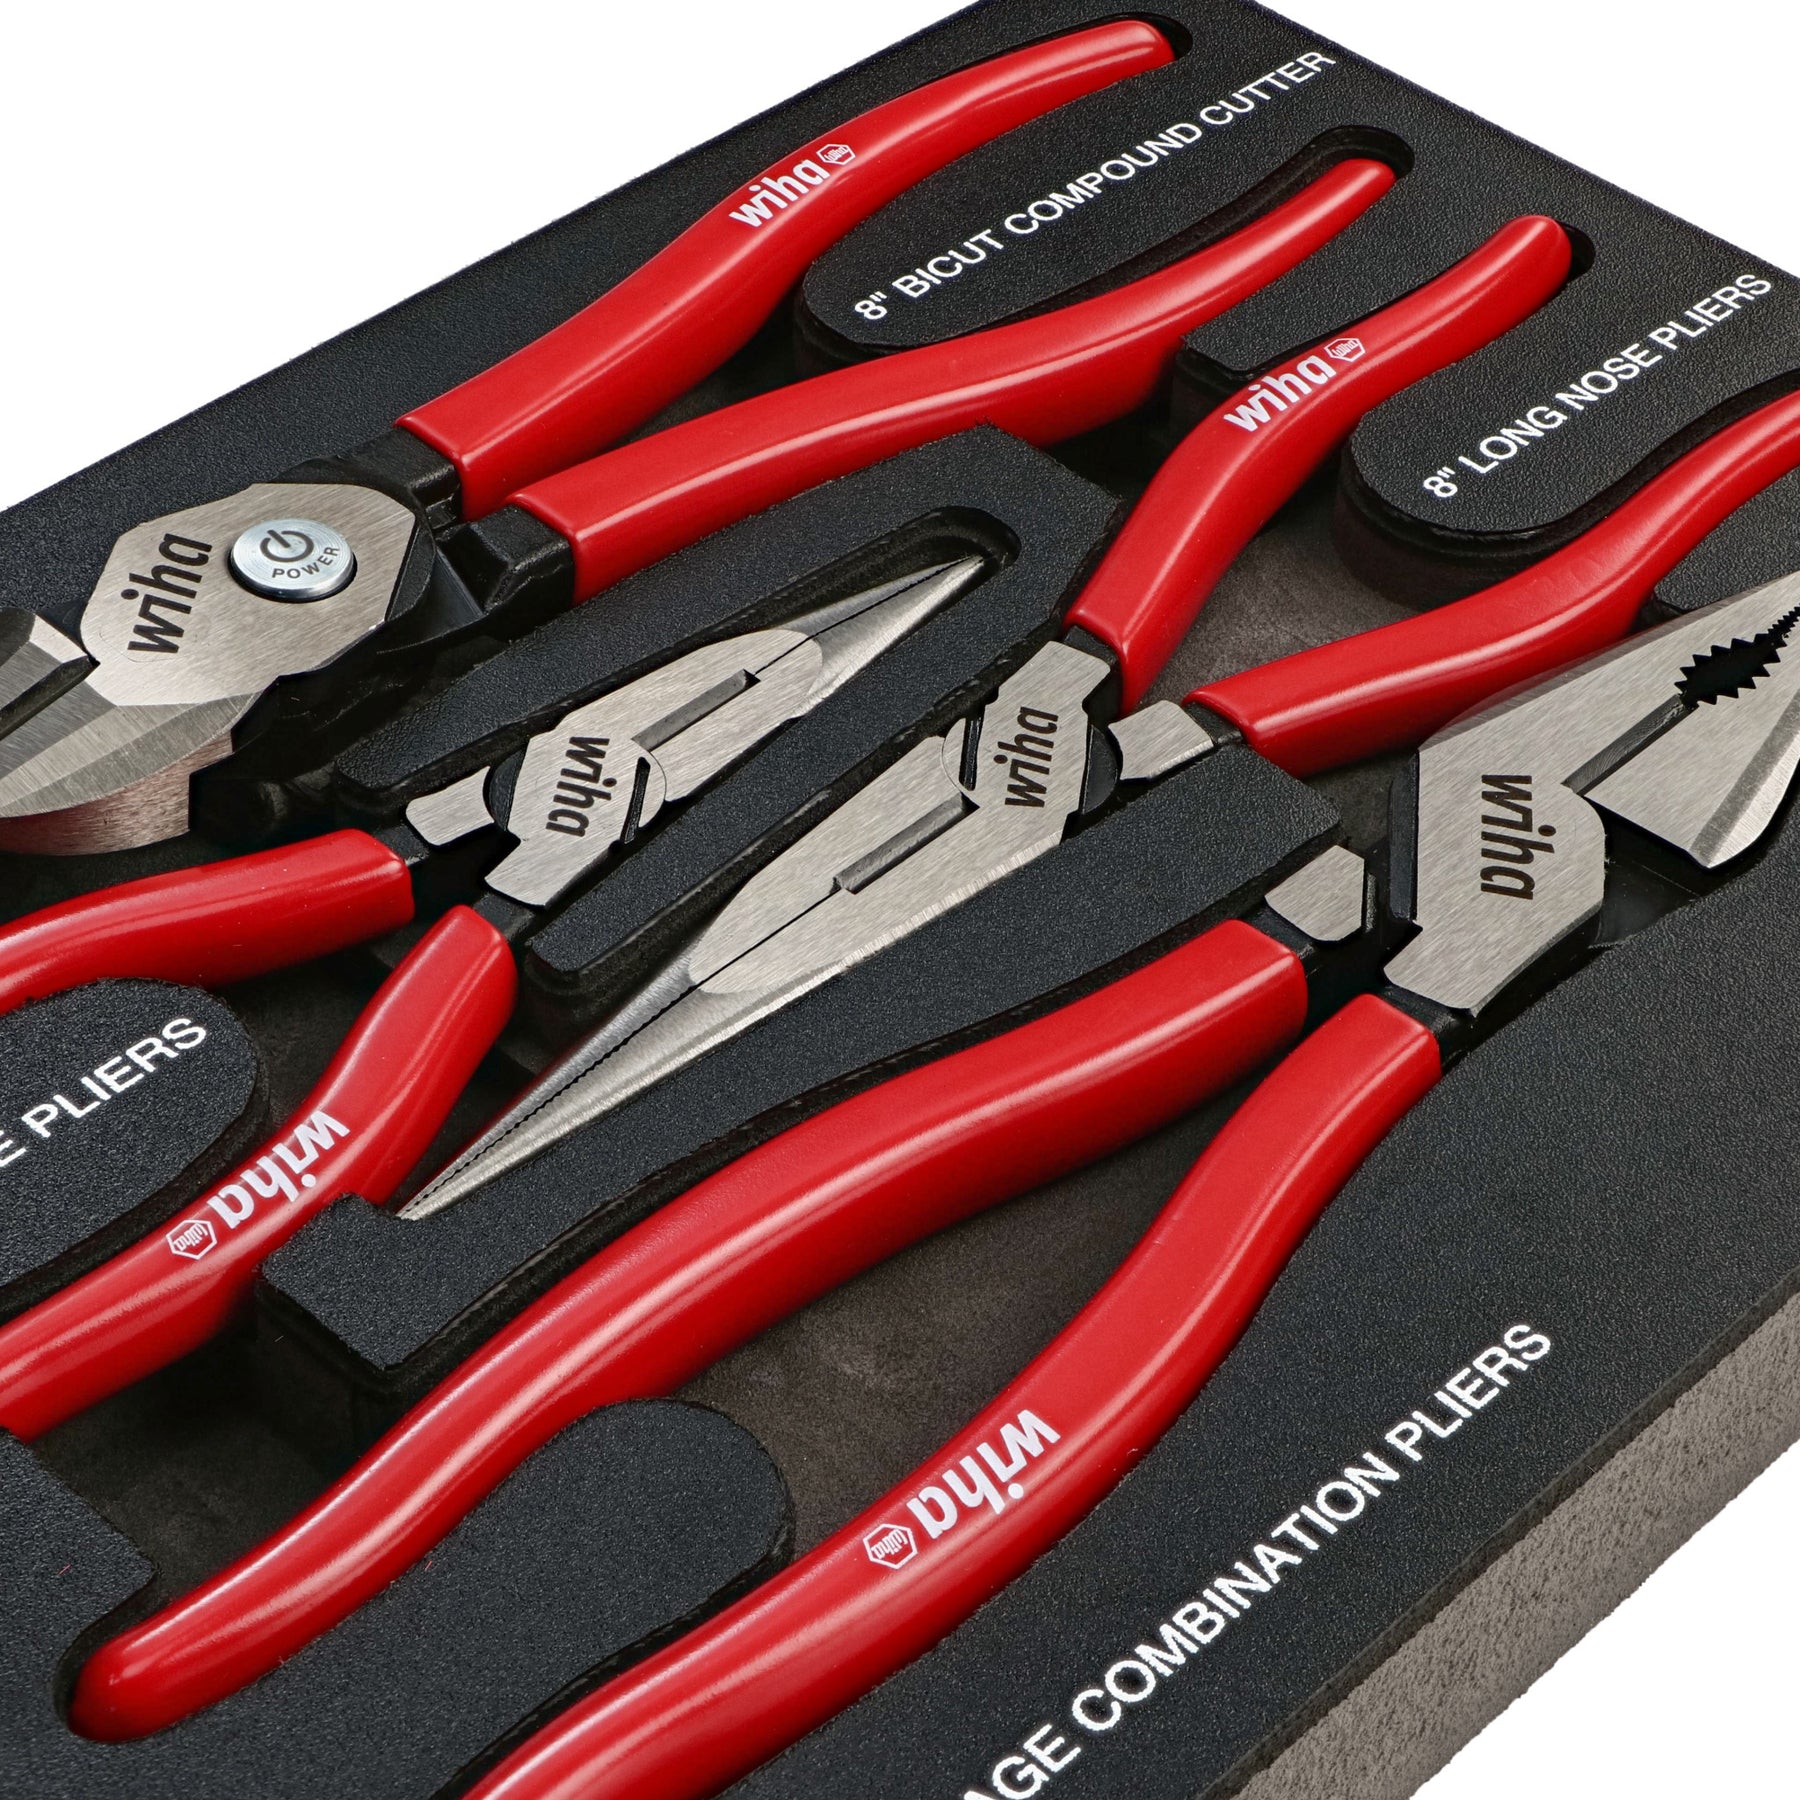 Wiha 34681 Piece Classic Grip Pliers and Cutters Tray Set